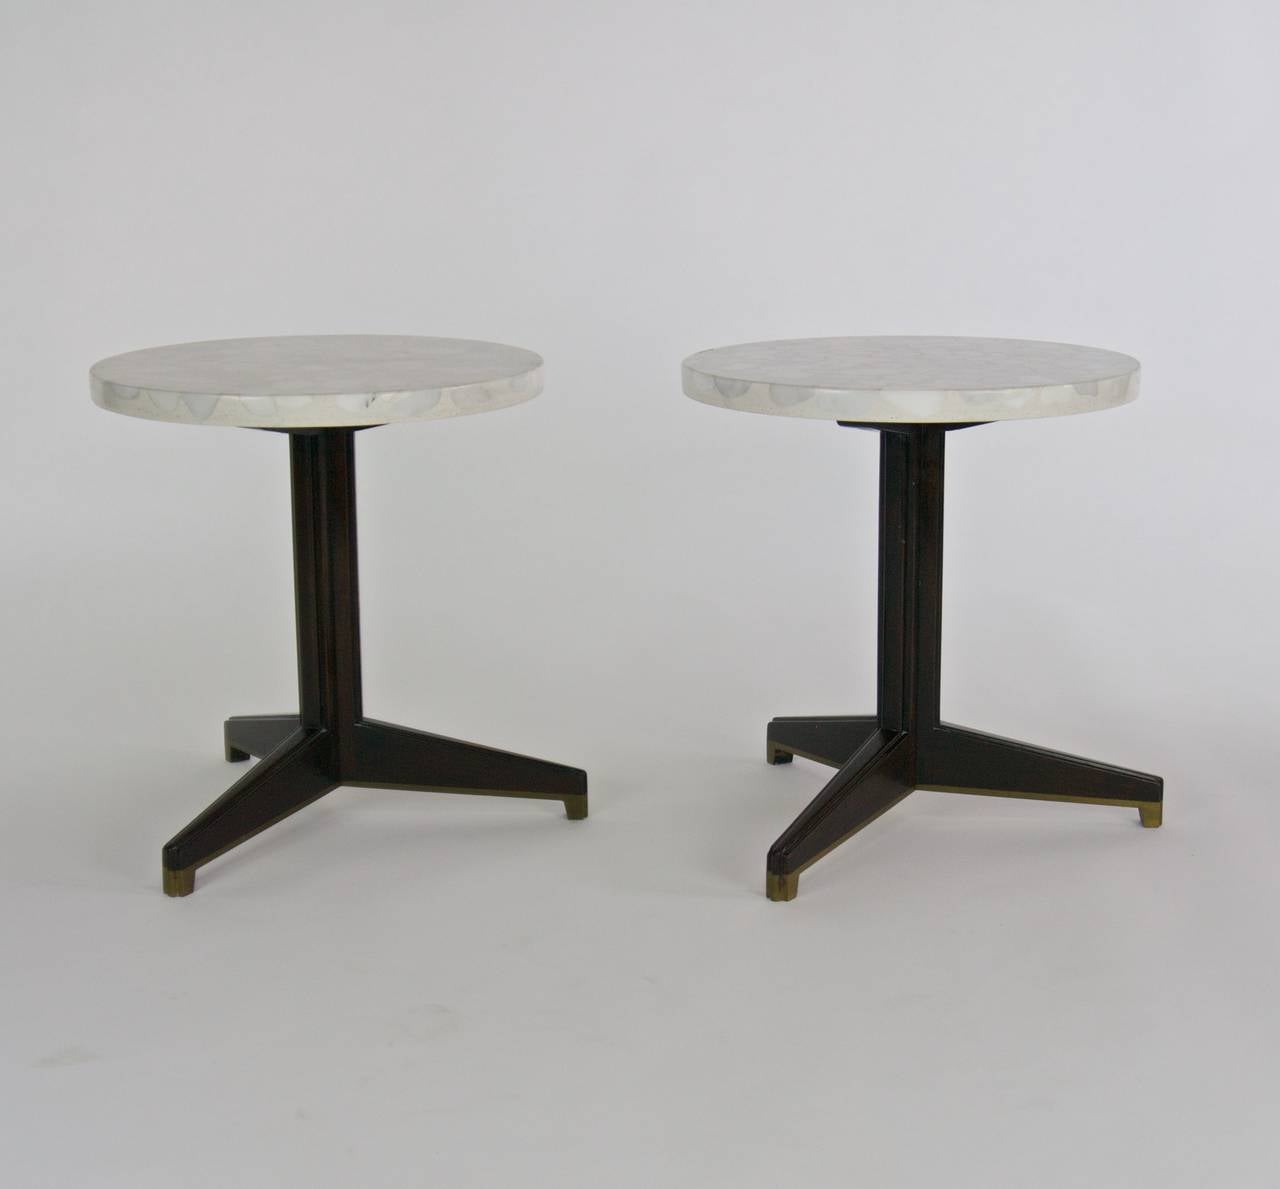 Rare Terrazzo Cocktail Tables by Edward Wormley for Dunbar In Good Condition For Sale In Hadley, MA